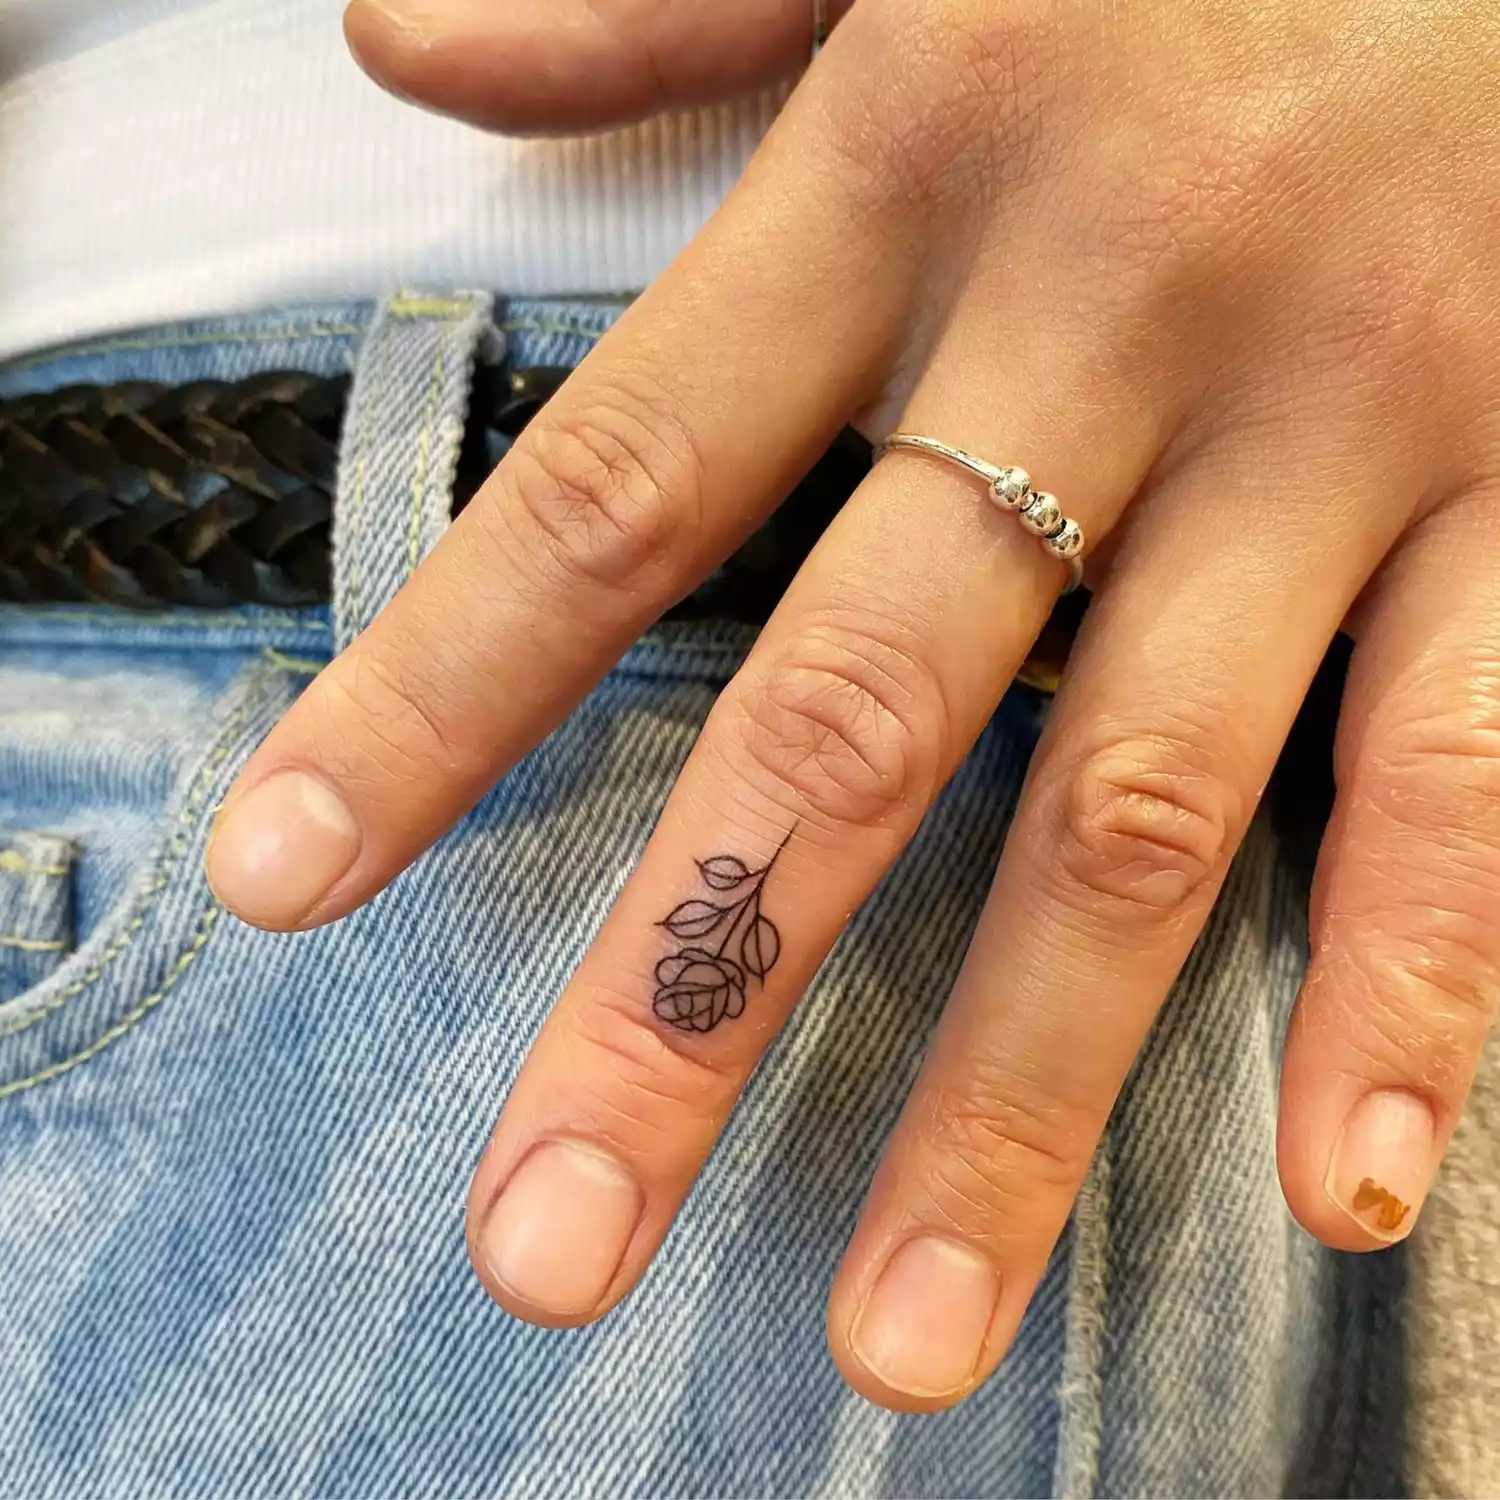 A close up of a rose tattoo on a finger.